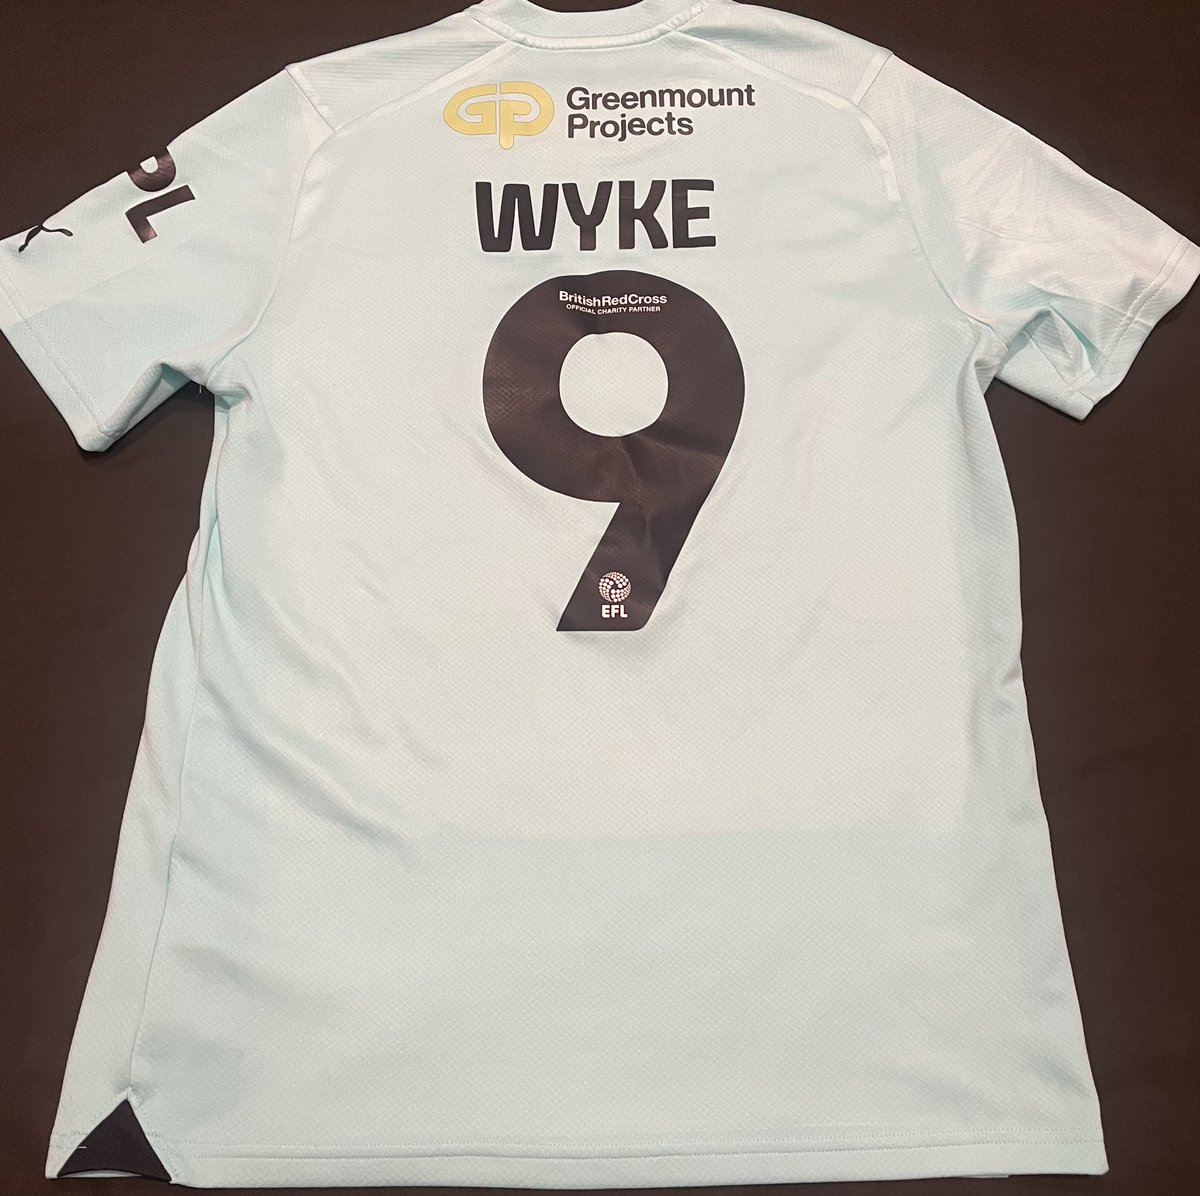 A huge thank you to @WillyTweet7 for very kindly donating a matchworn @Charliewyke1 shirt for me to auction off for the @as9foundation please reply or DM me with a bid. Ends Sunday 8PM. #wafc @LaticsOfficial